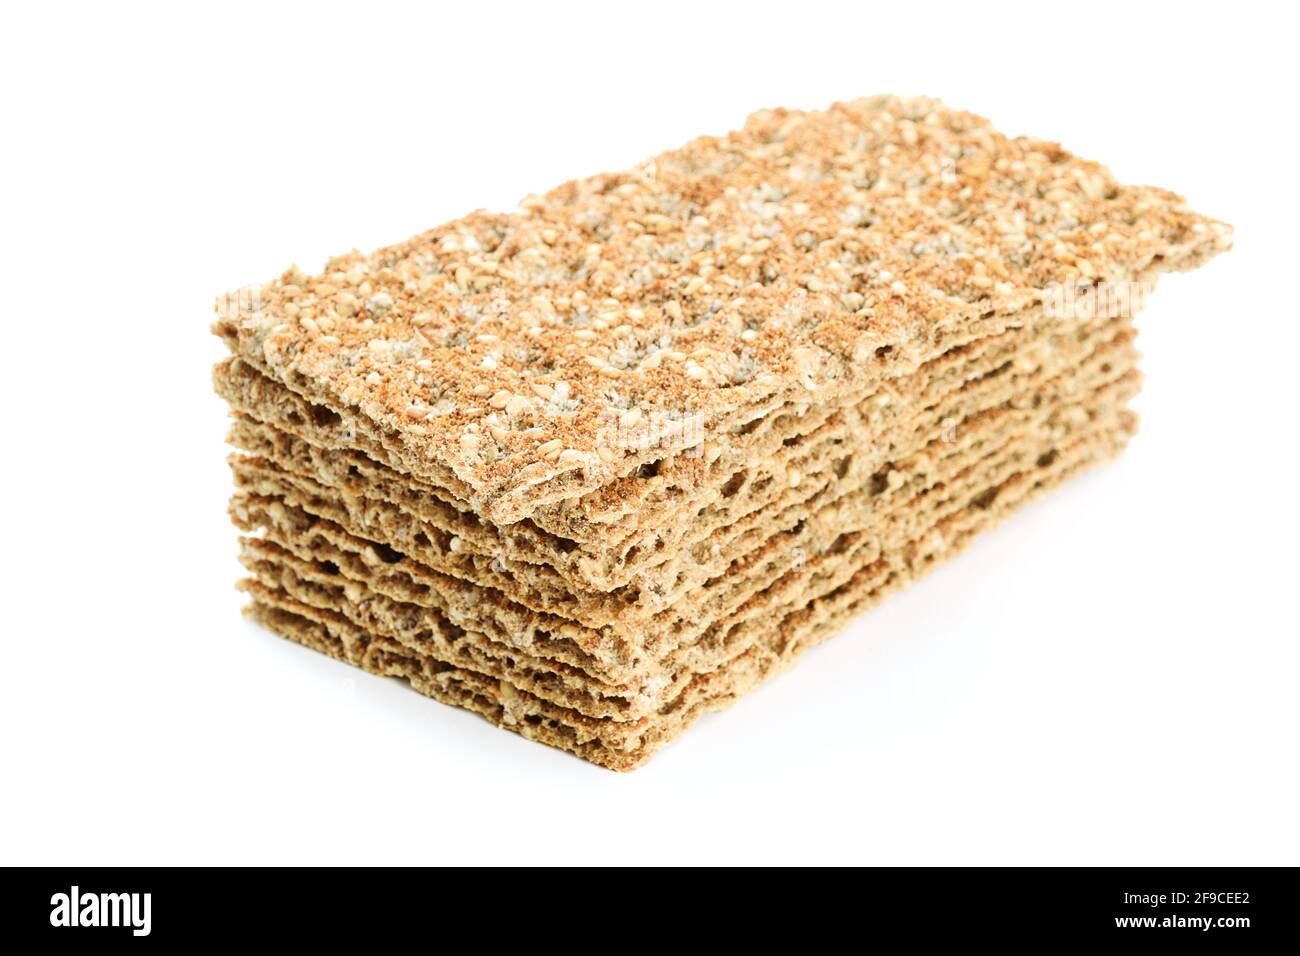 Stack of whole grain dry crispy bread with sesame isolated on a white background in close-up Stock Photo